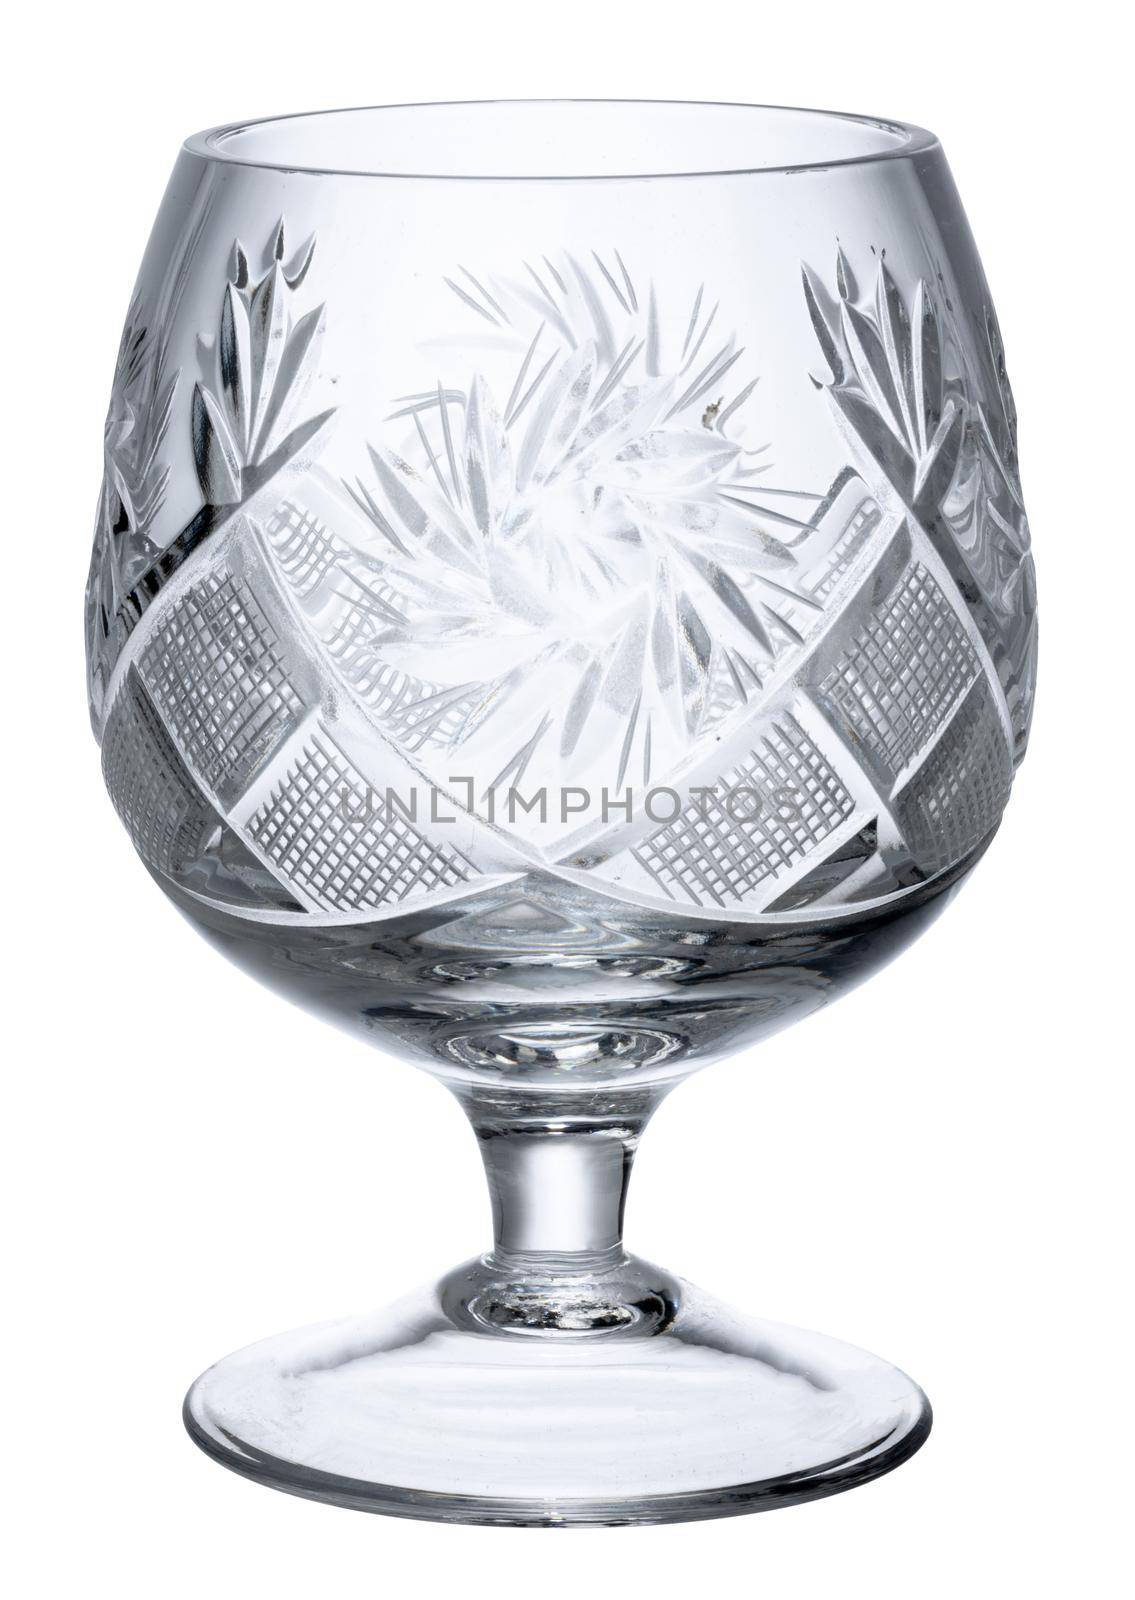 New empty whisky glass isolated on white background